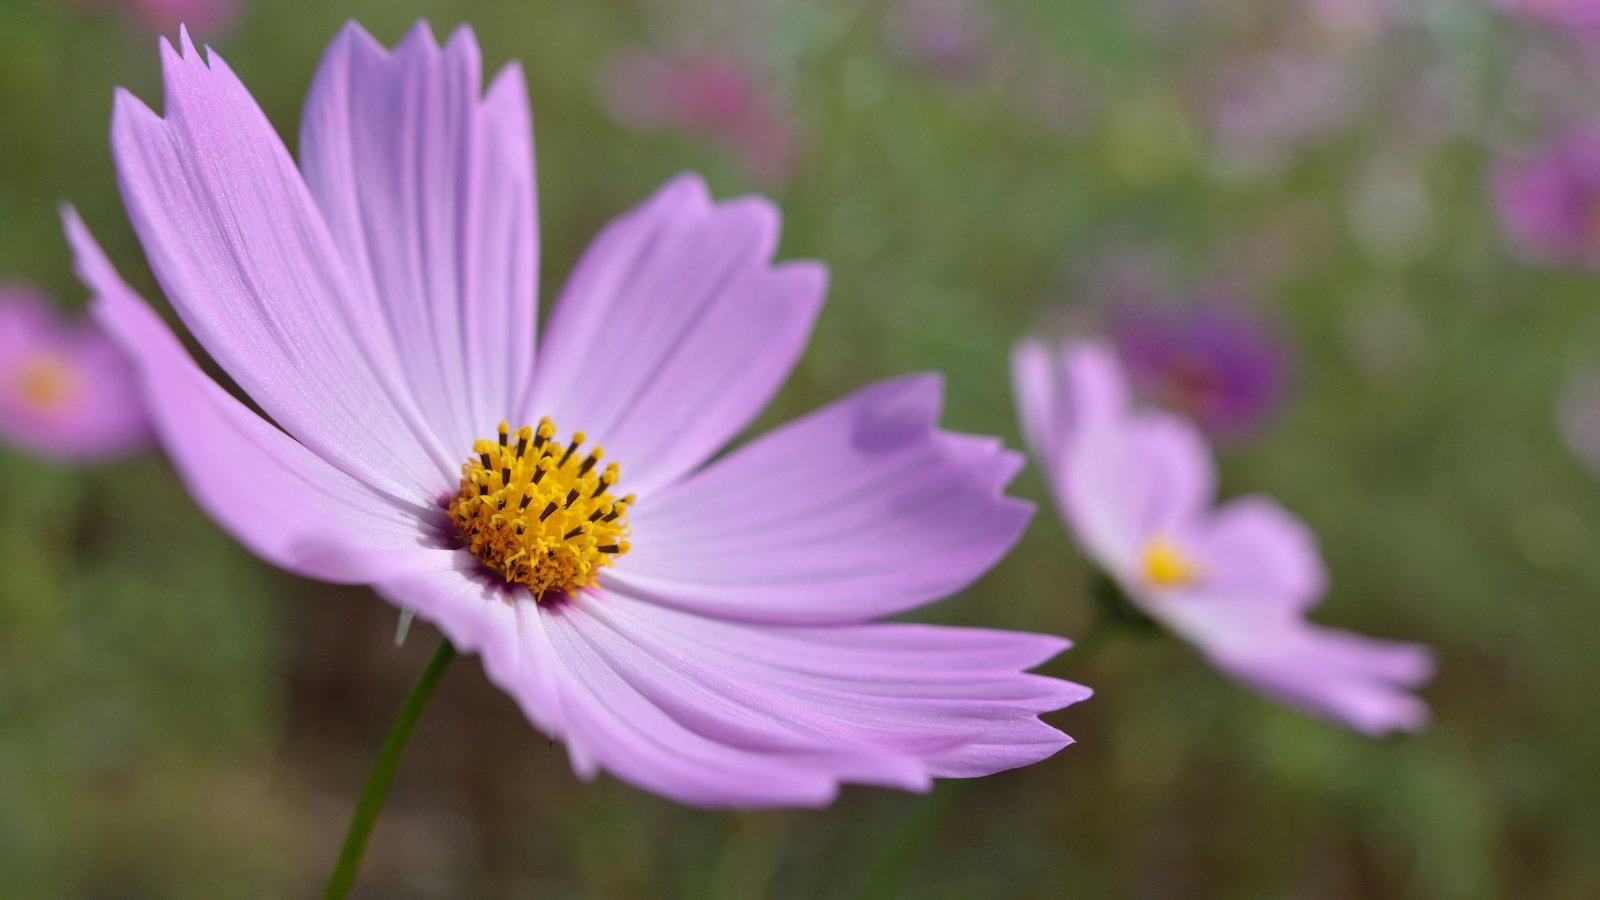 A close-up of a purple cosmos flower with a sunny yellow center, its delicate petals softly unfurling against a backdrop of blurred foliage, revealing a cluster of other blossoms in the distance.